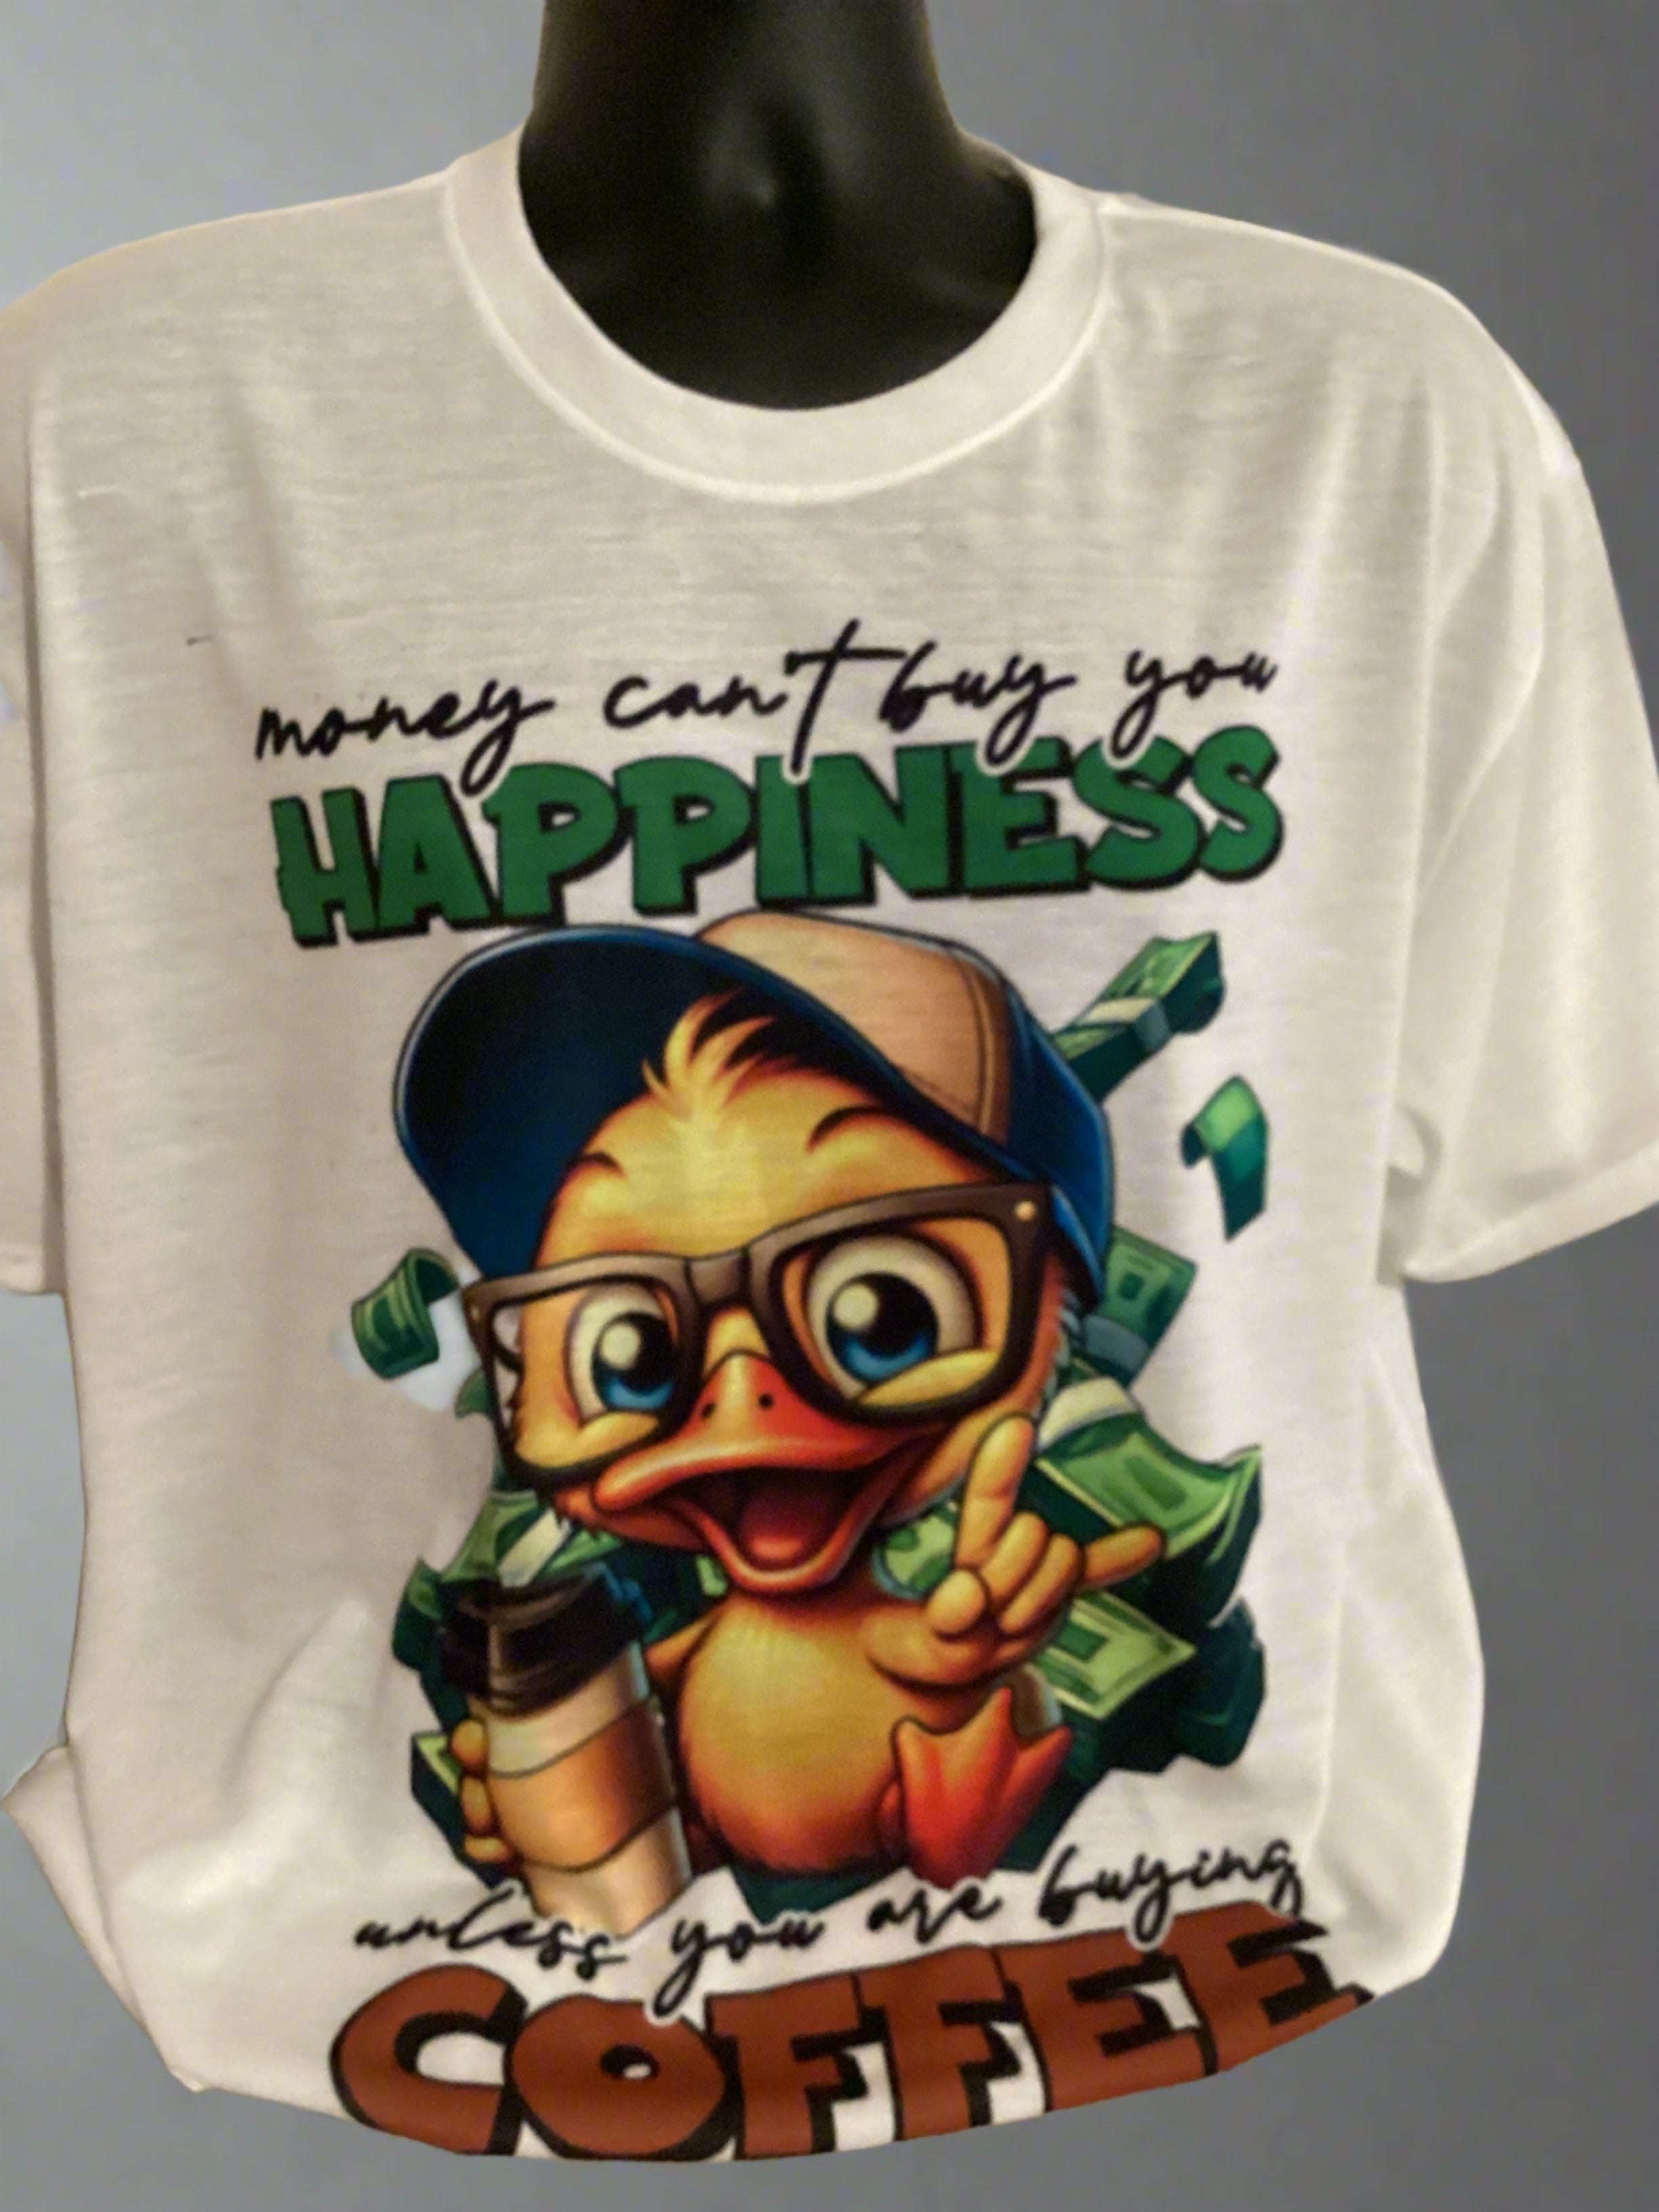 Money Can’t Buy Happiness Tshirt